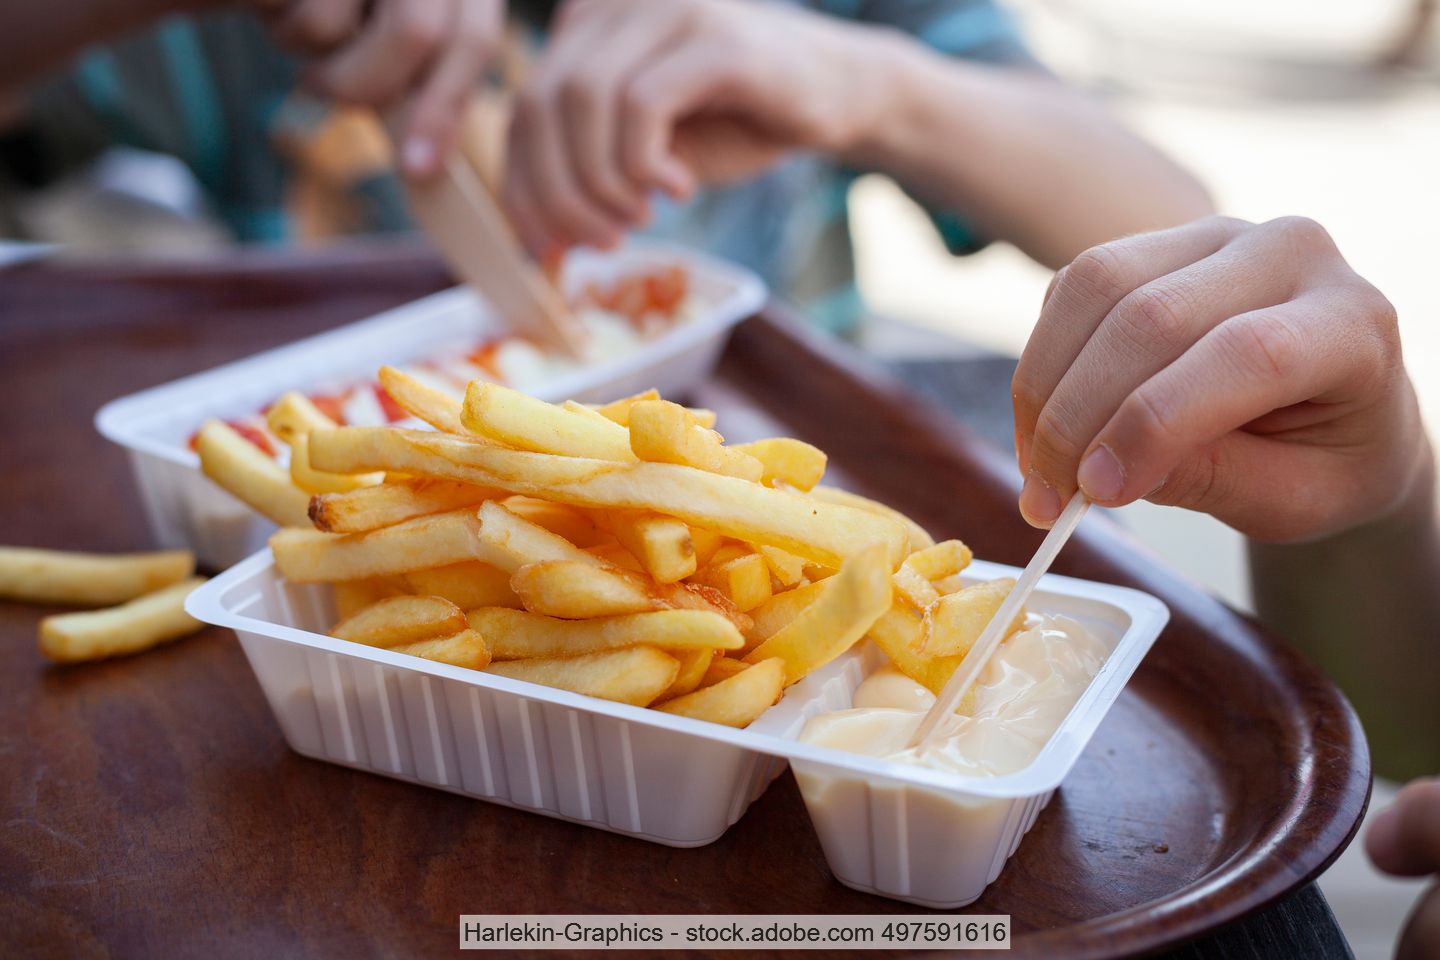 A child's hand pokes a portion of French fries and mayonnaise in a disposable plastic bowl with a chip fork.